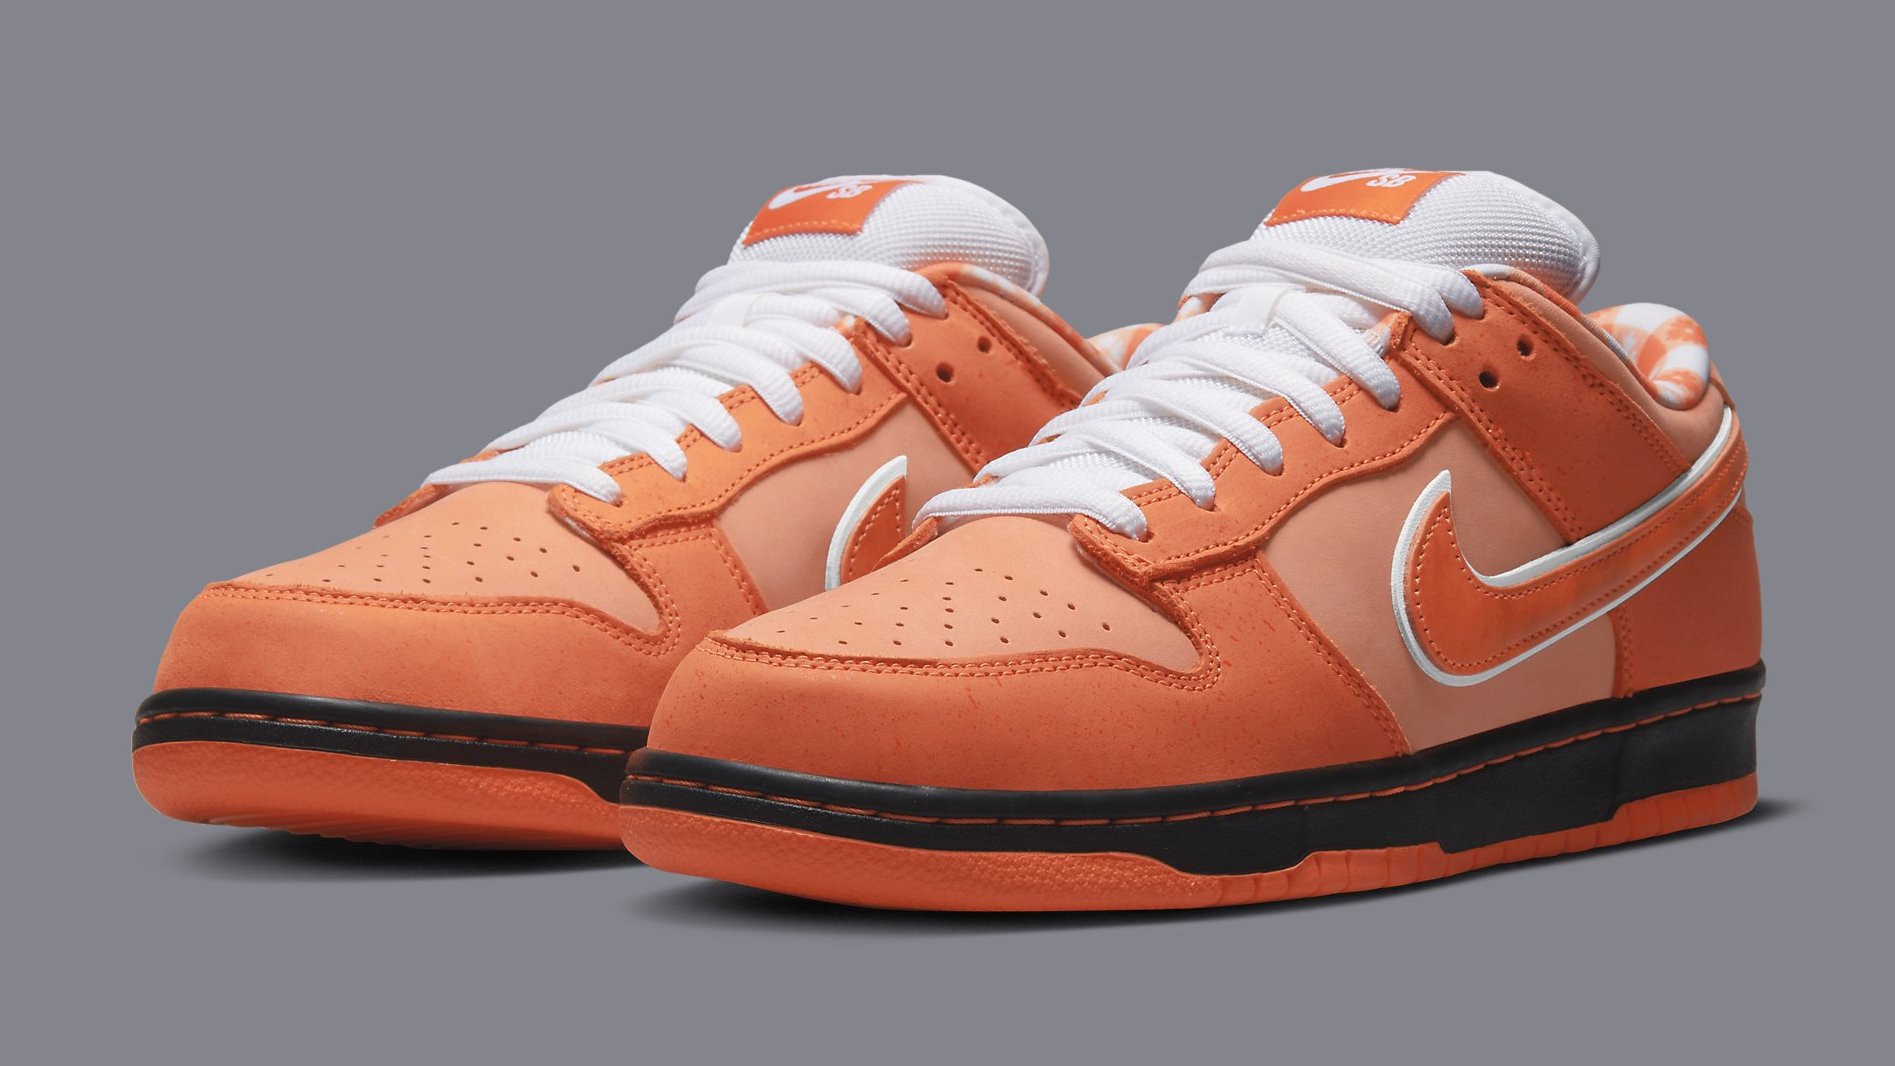 'Orange Lobster' Concepts x Nike SB Dunk Gets an Official Release Date